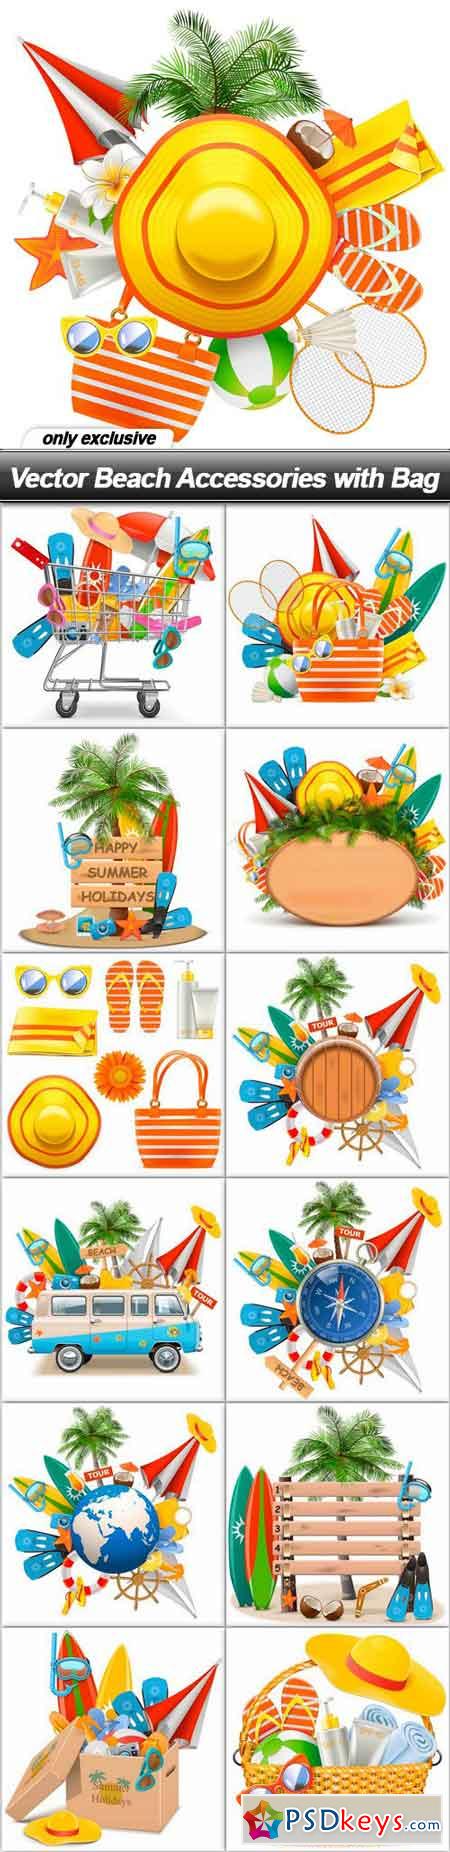 Vector Beach Accessories with Bag - 13 EPS